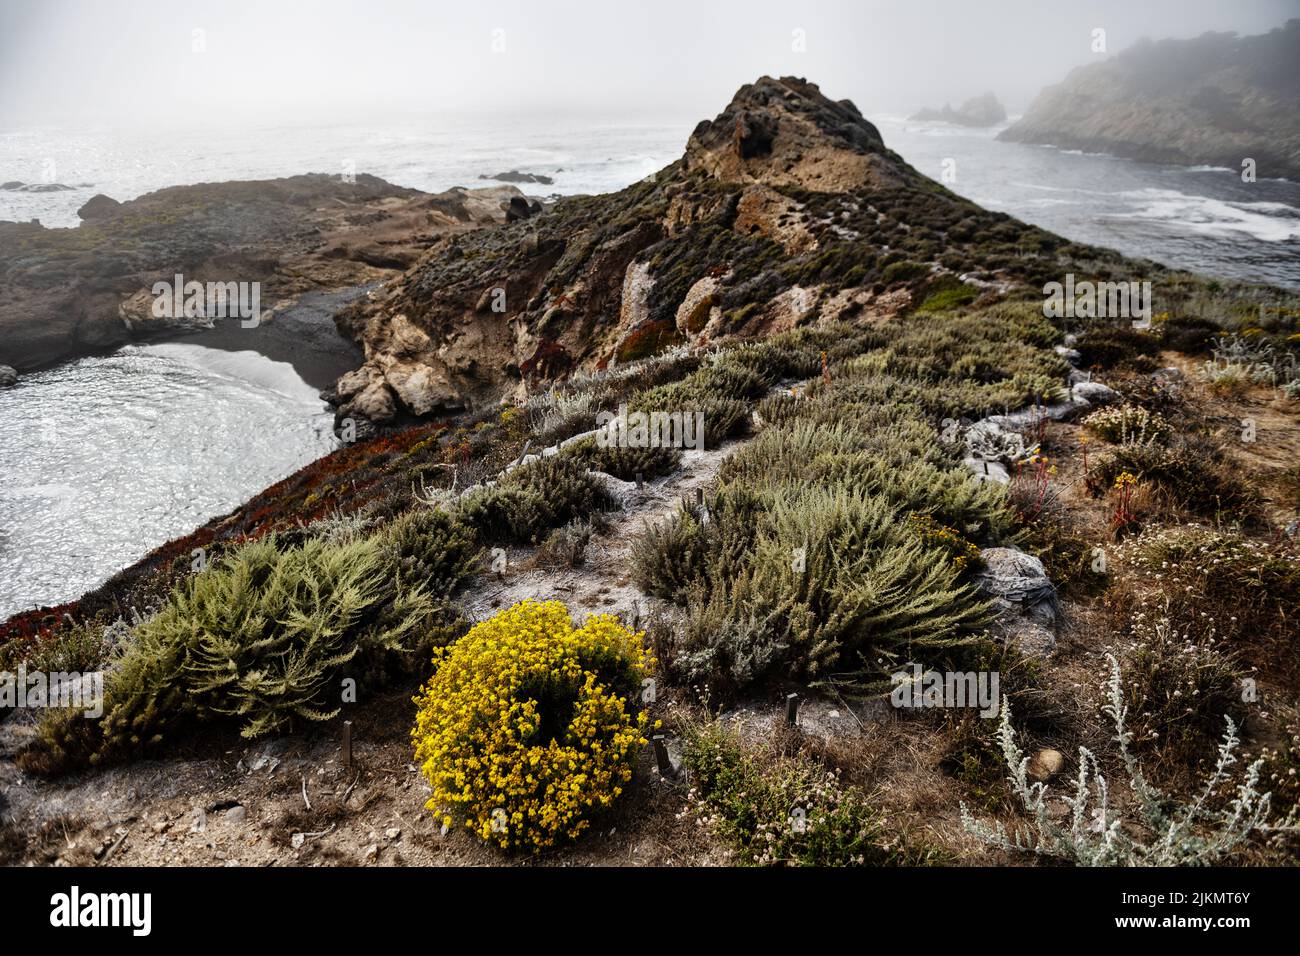 Coastline of point lobos state natural reserve, California Stock Photo